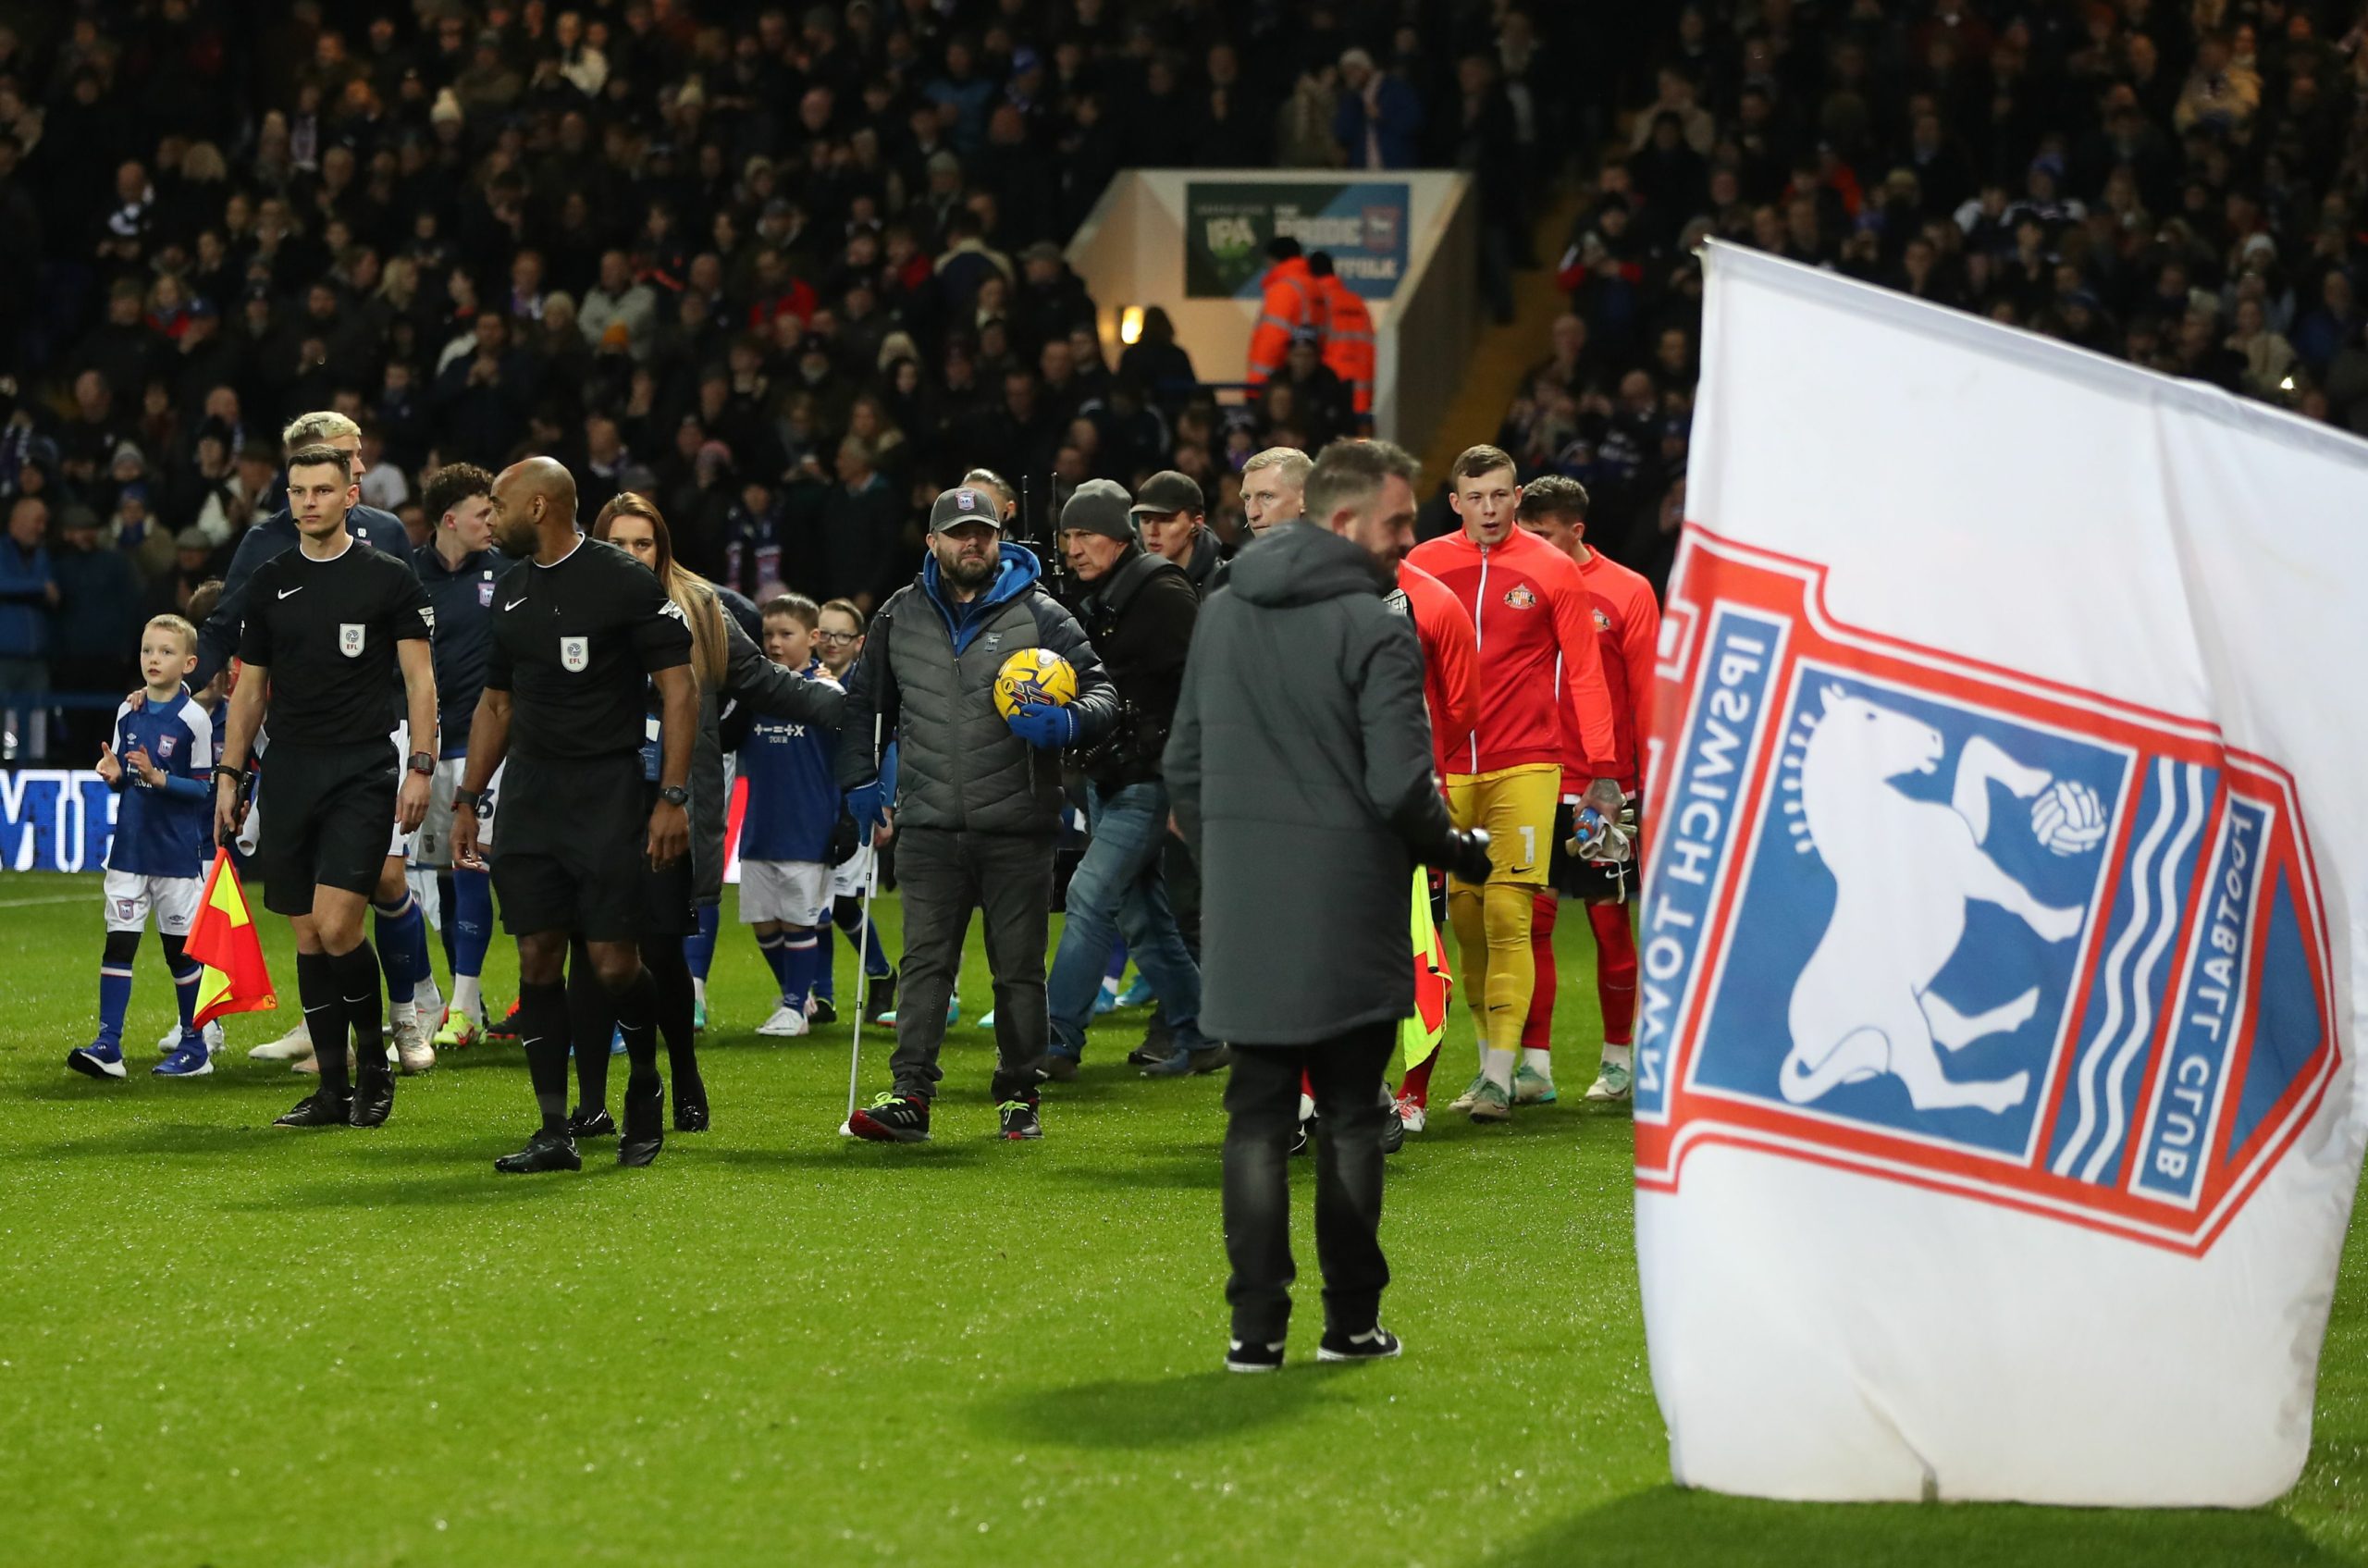 Ipswich Town's community champion Adam Woodmason leading out the sides ahead of their fixture against Sunderland. 